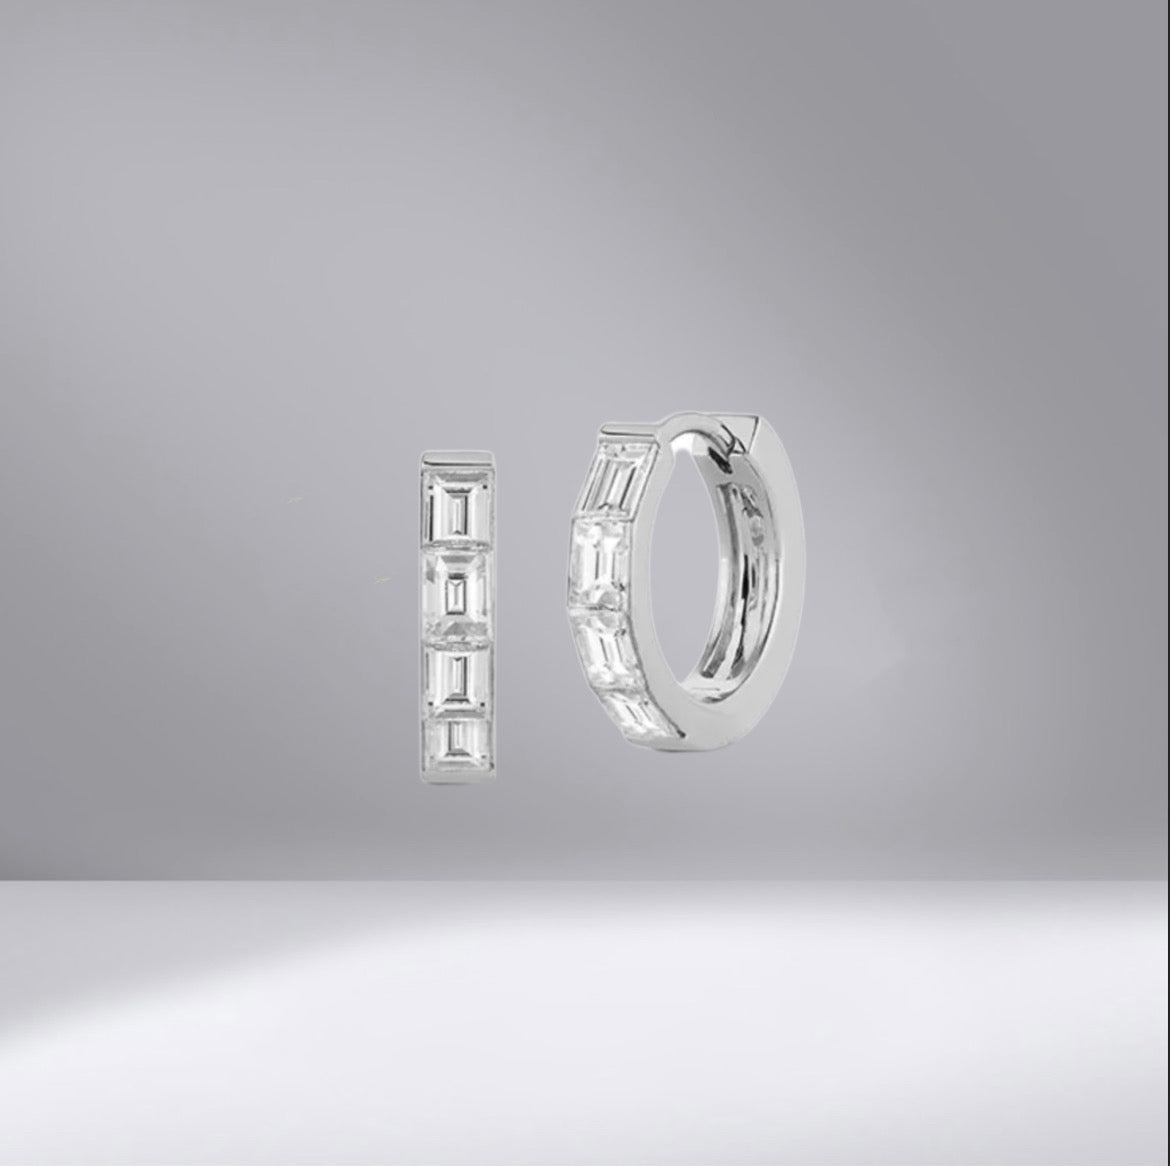 Baguette Diamond Huggies with sliver ring